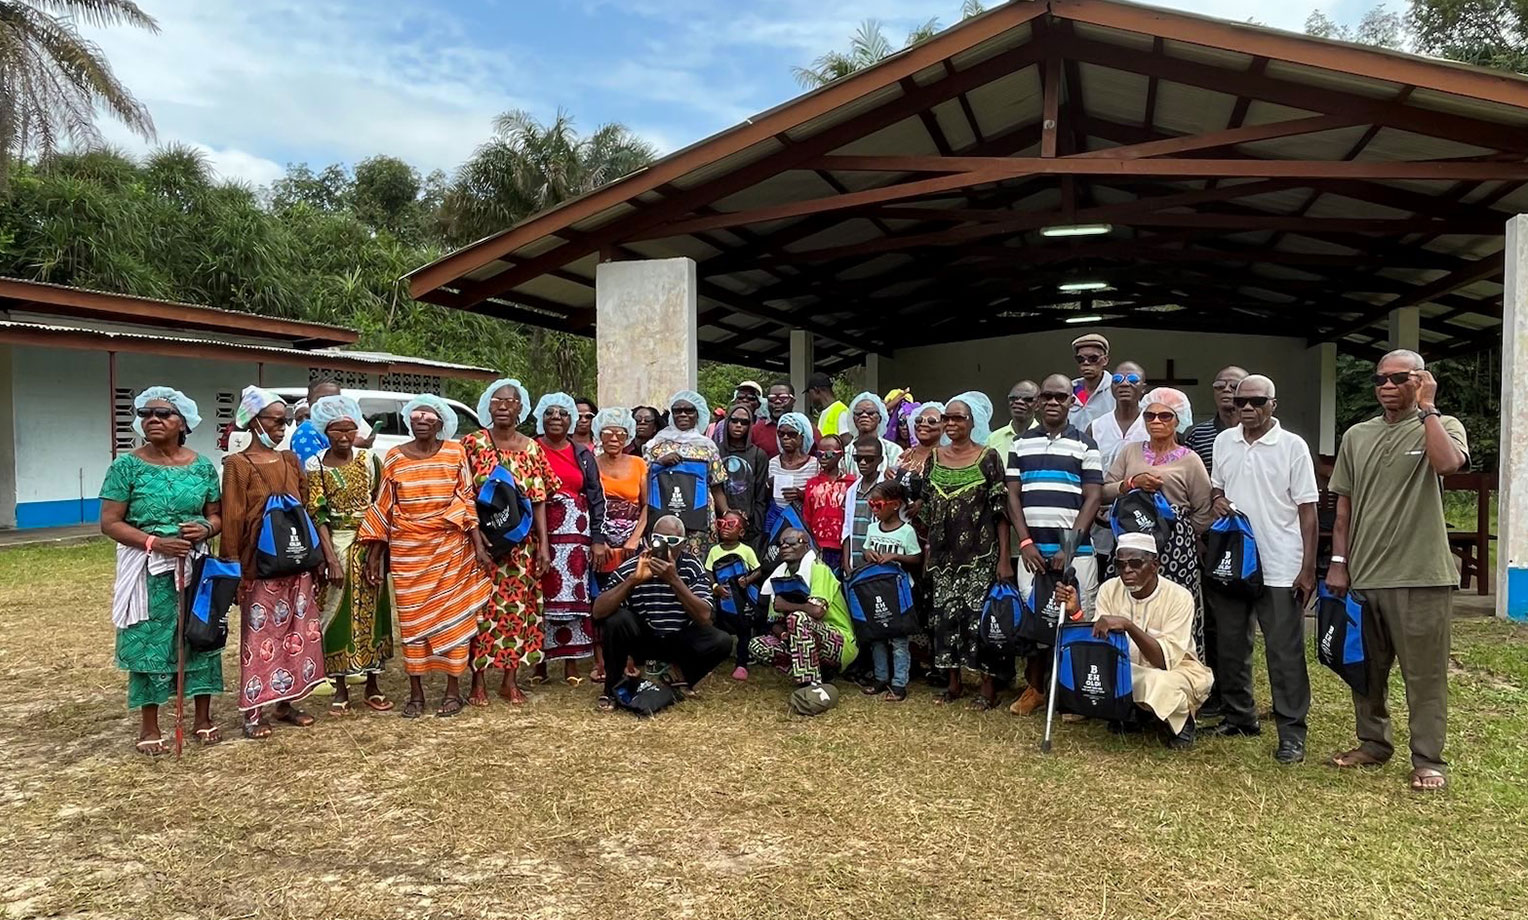 Group photo of cataract patients in Liberia helped by Samaritan's Purse. Scores of people received their sight in Liberia this summer through surgeries from Samaritan's Purse.